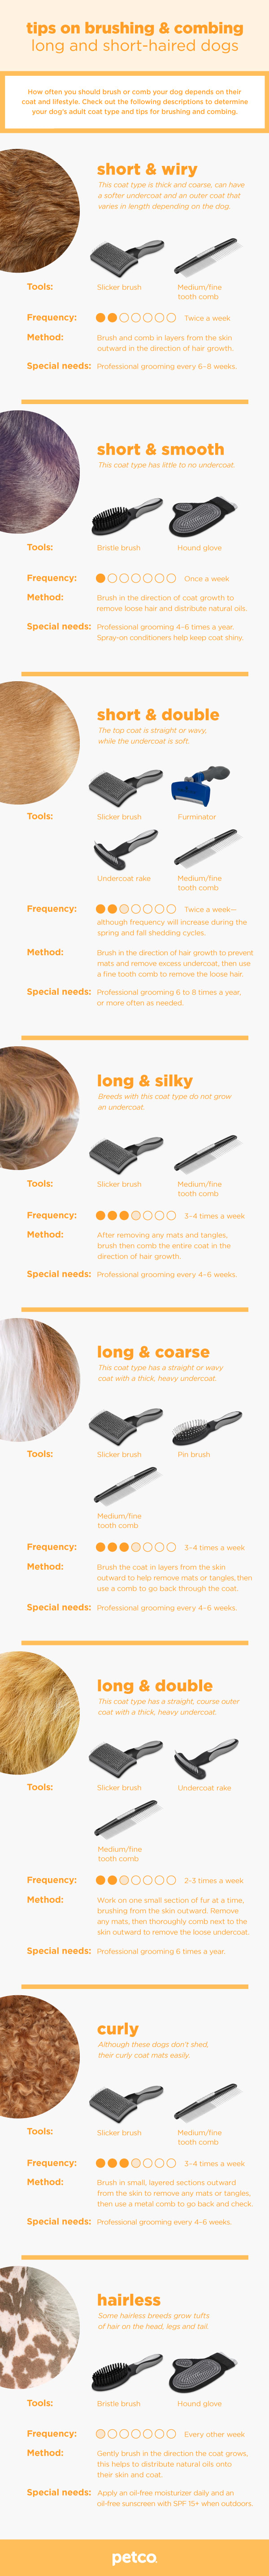 How often to brush your dog infographic